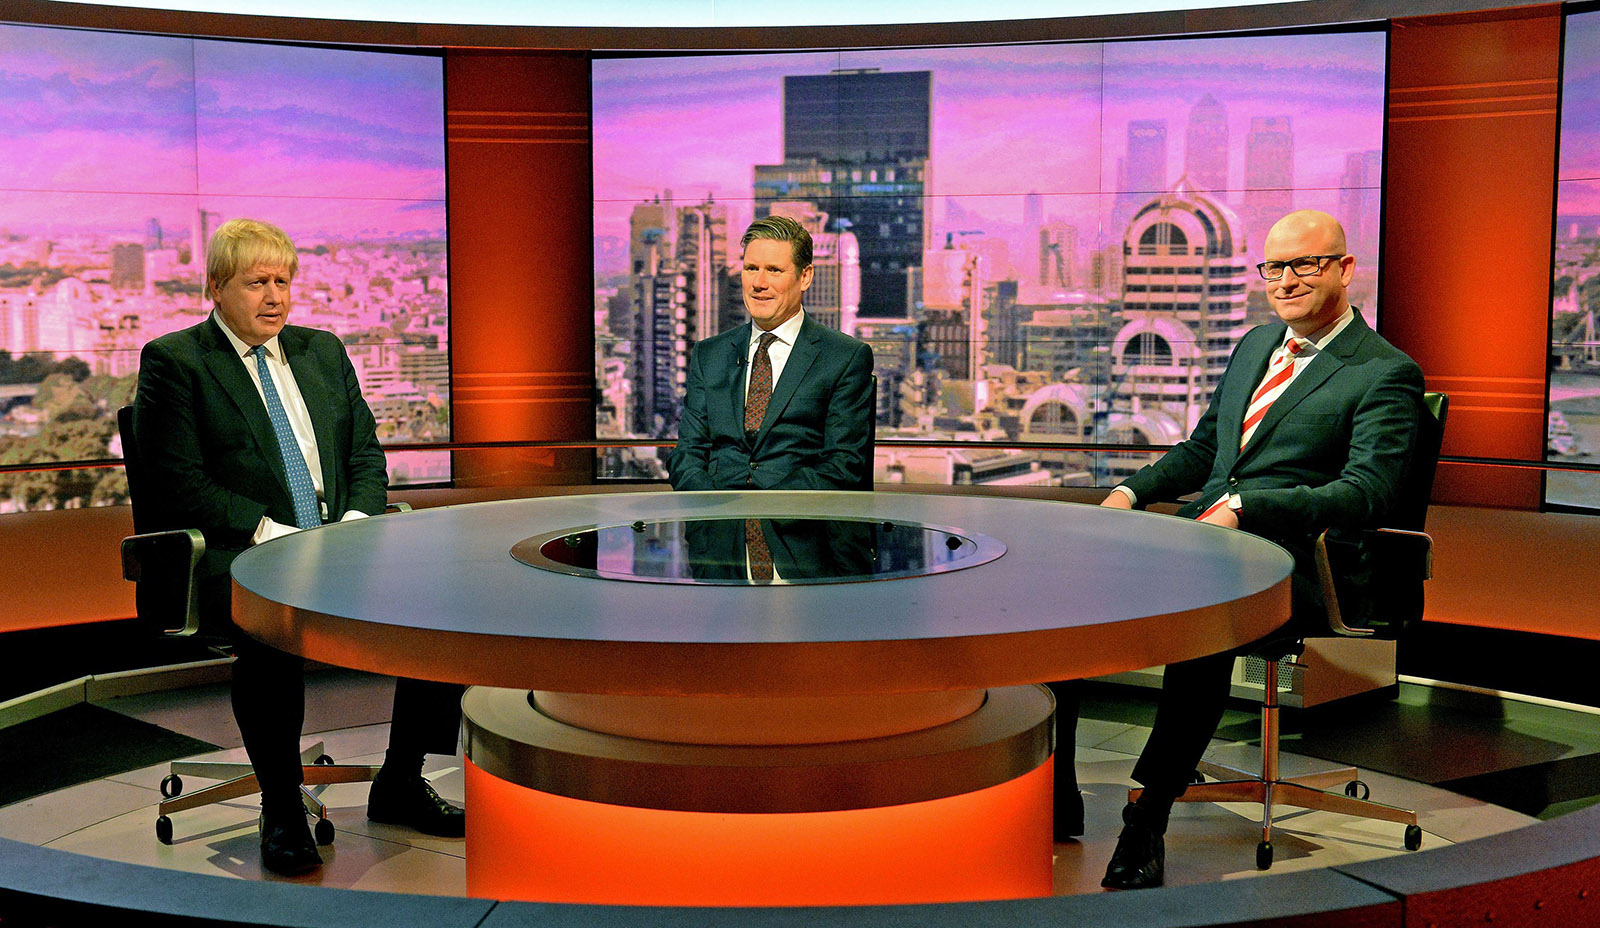 British Foreign Secretary Boris Johnson, Labour’s Brexit spokesman Sir Keir Starmer, and United Kingdom Independence Party leader Paul Nuttall during filming for the BBC’s current affairs program The Andrew Marr Show, London, December 4, 2016